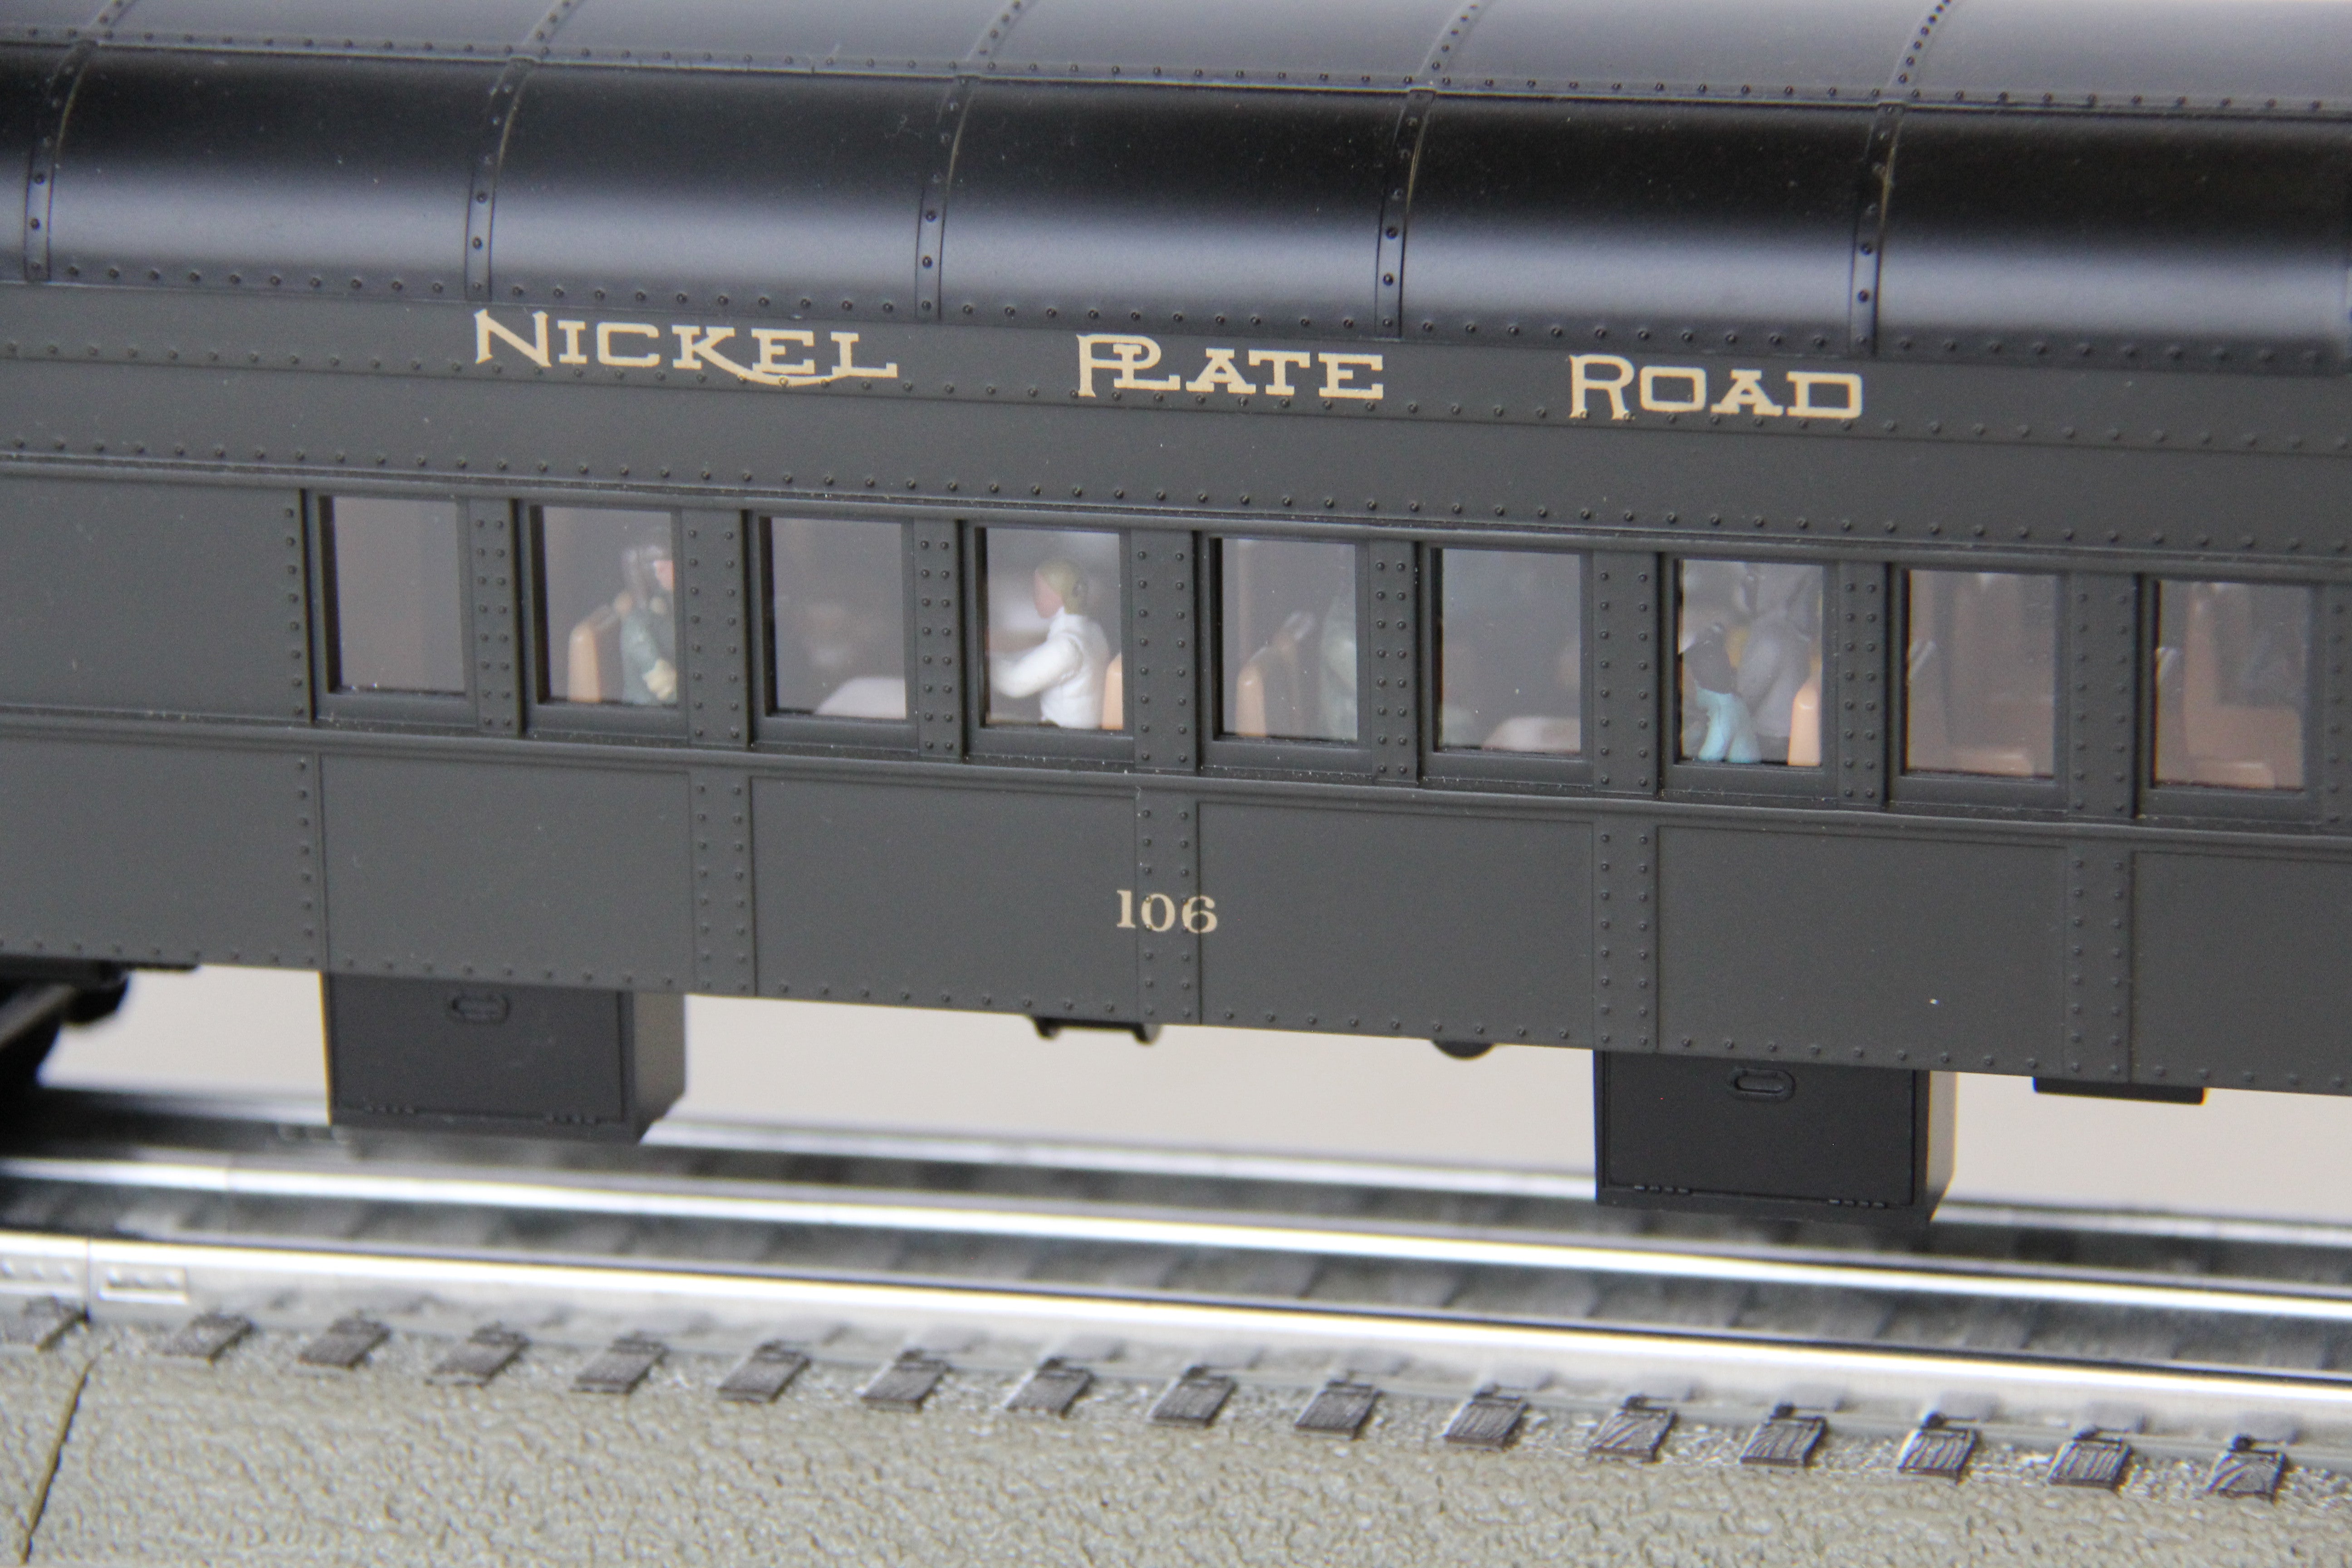 MTH 20-41040 Nickel Plate Road 2 Car 70' Madison Combine/Diner Pass Set-Second hand-M4162